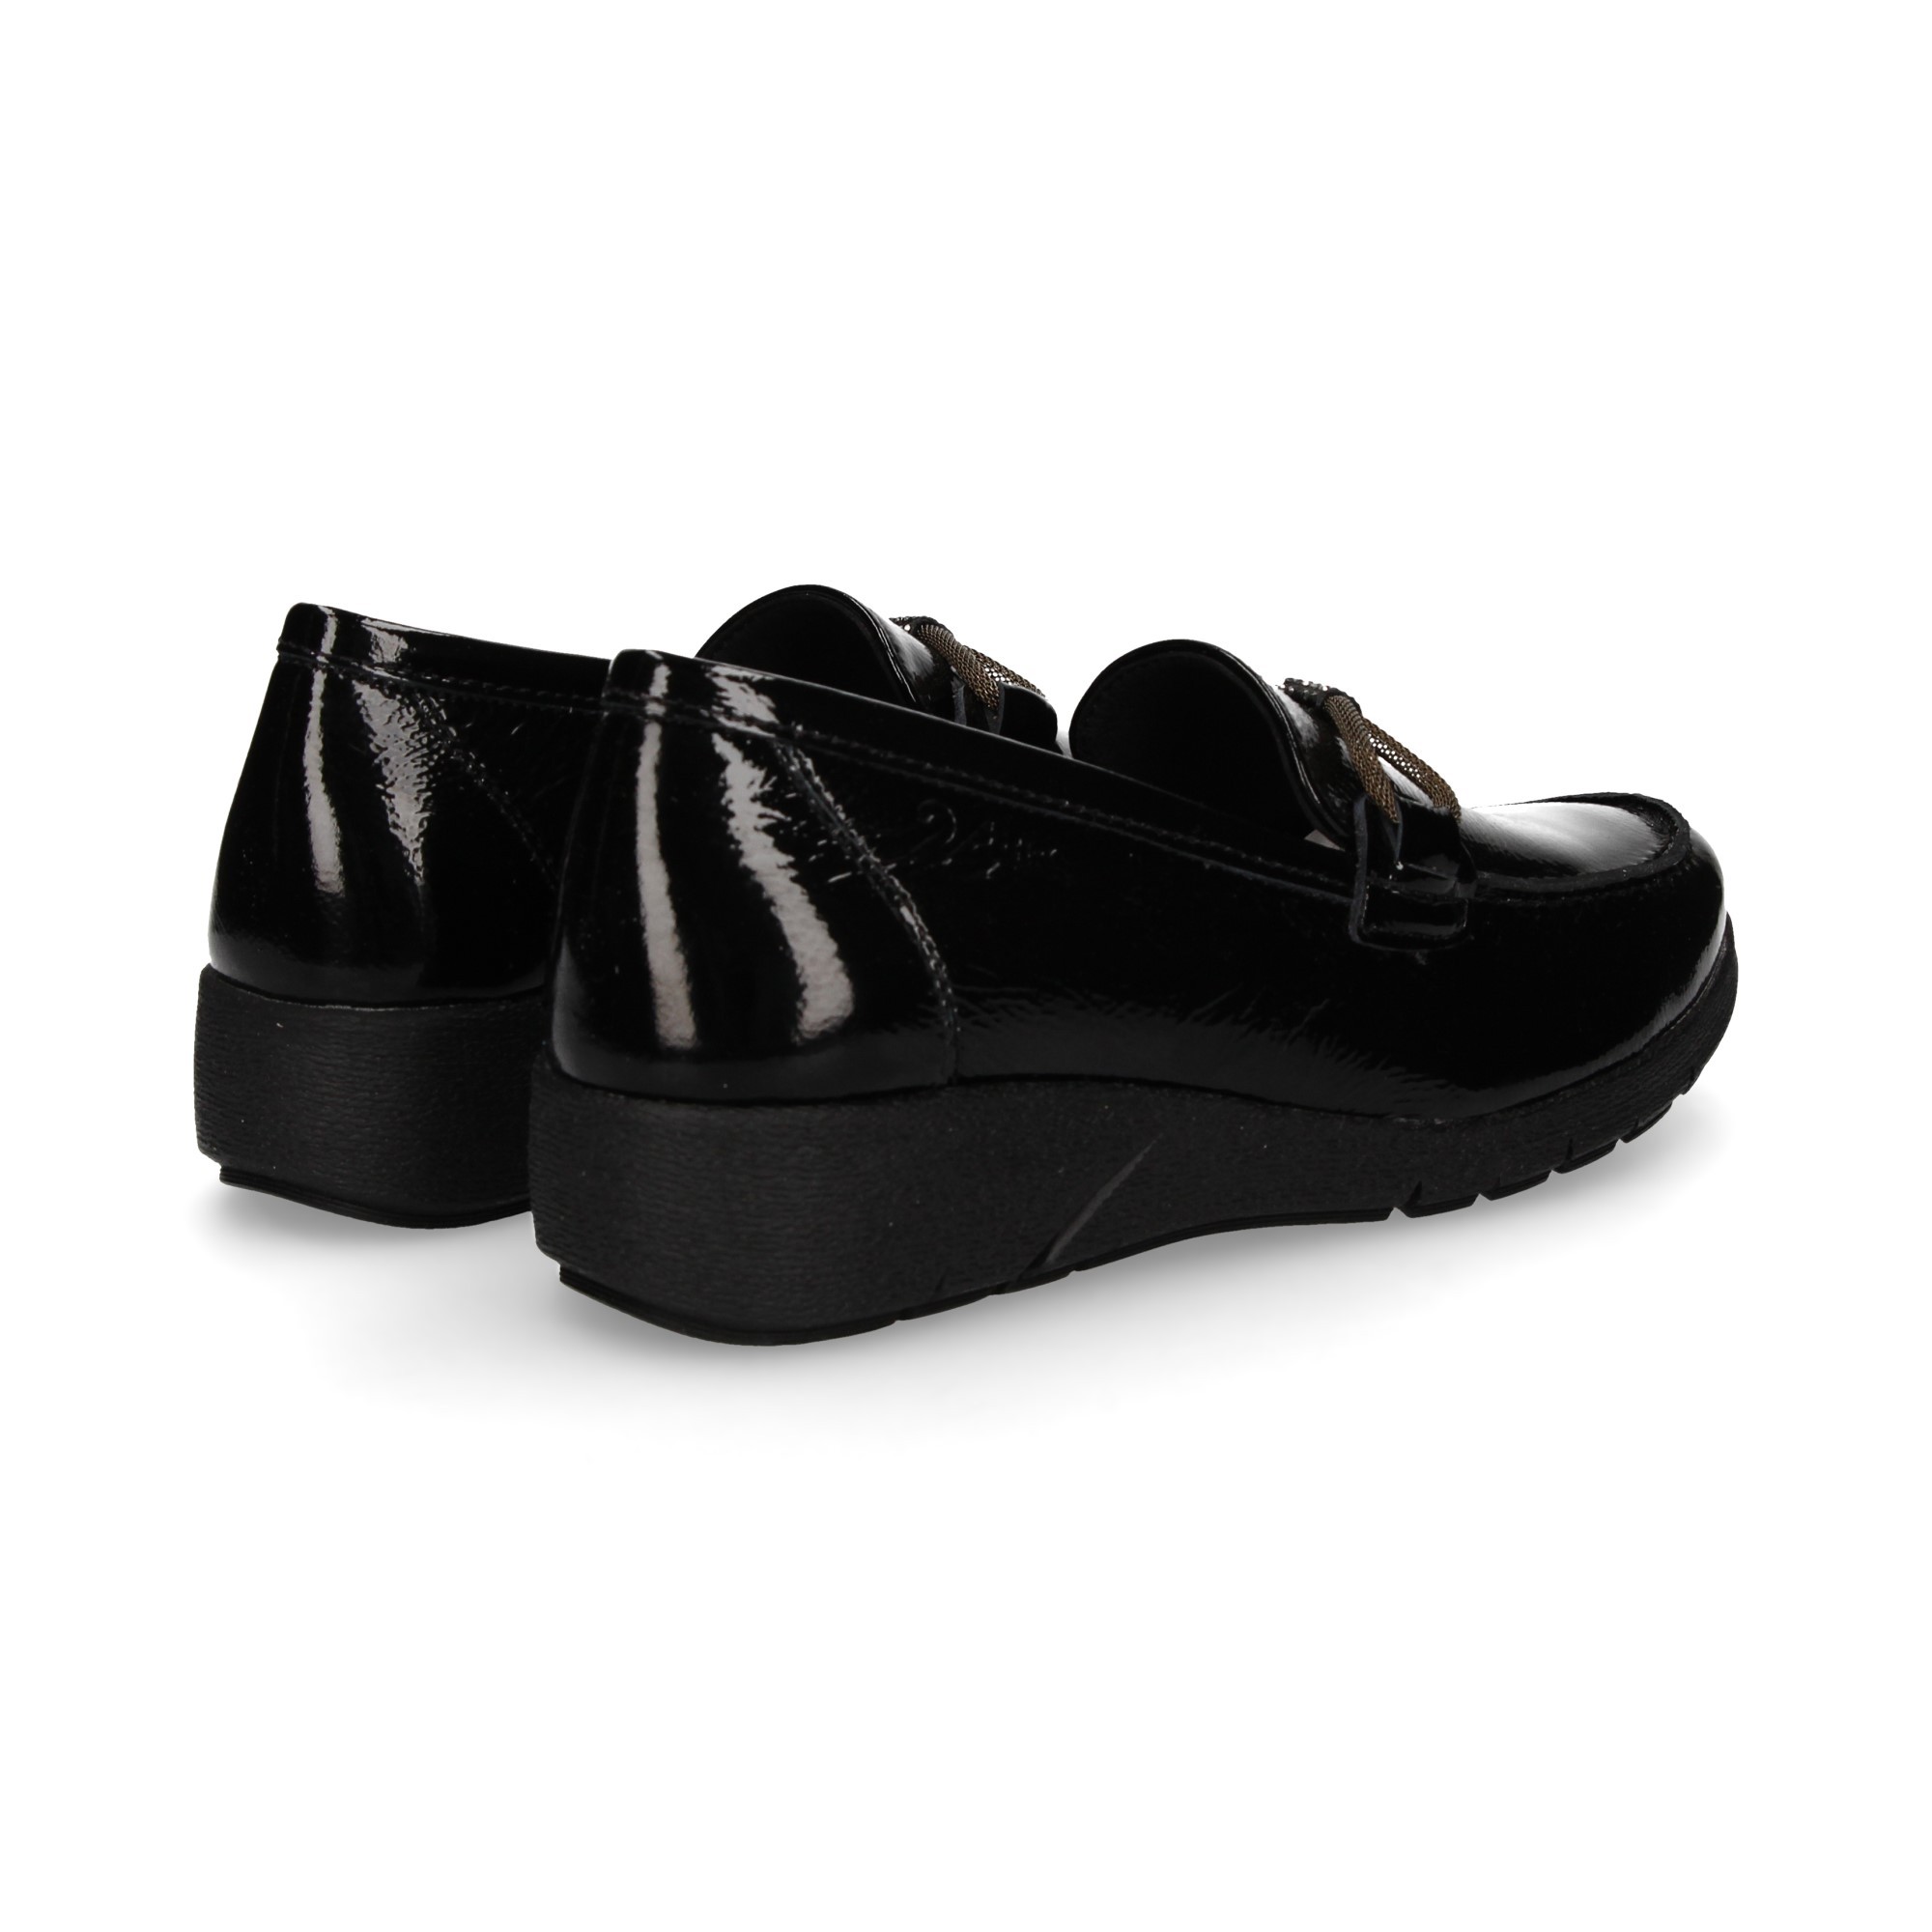 moccasin-wedge-link-moccasin-strass-black-patent-leather